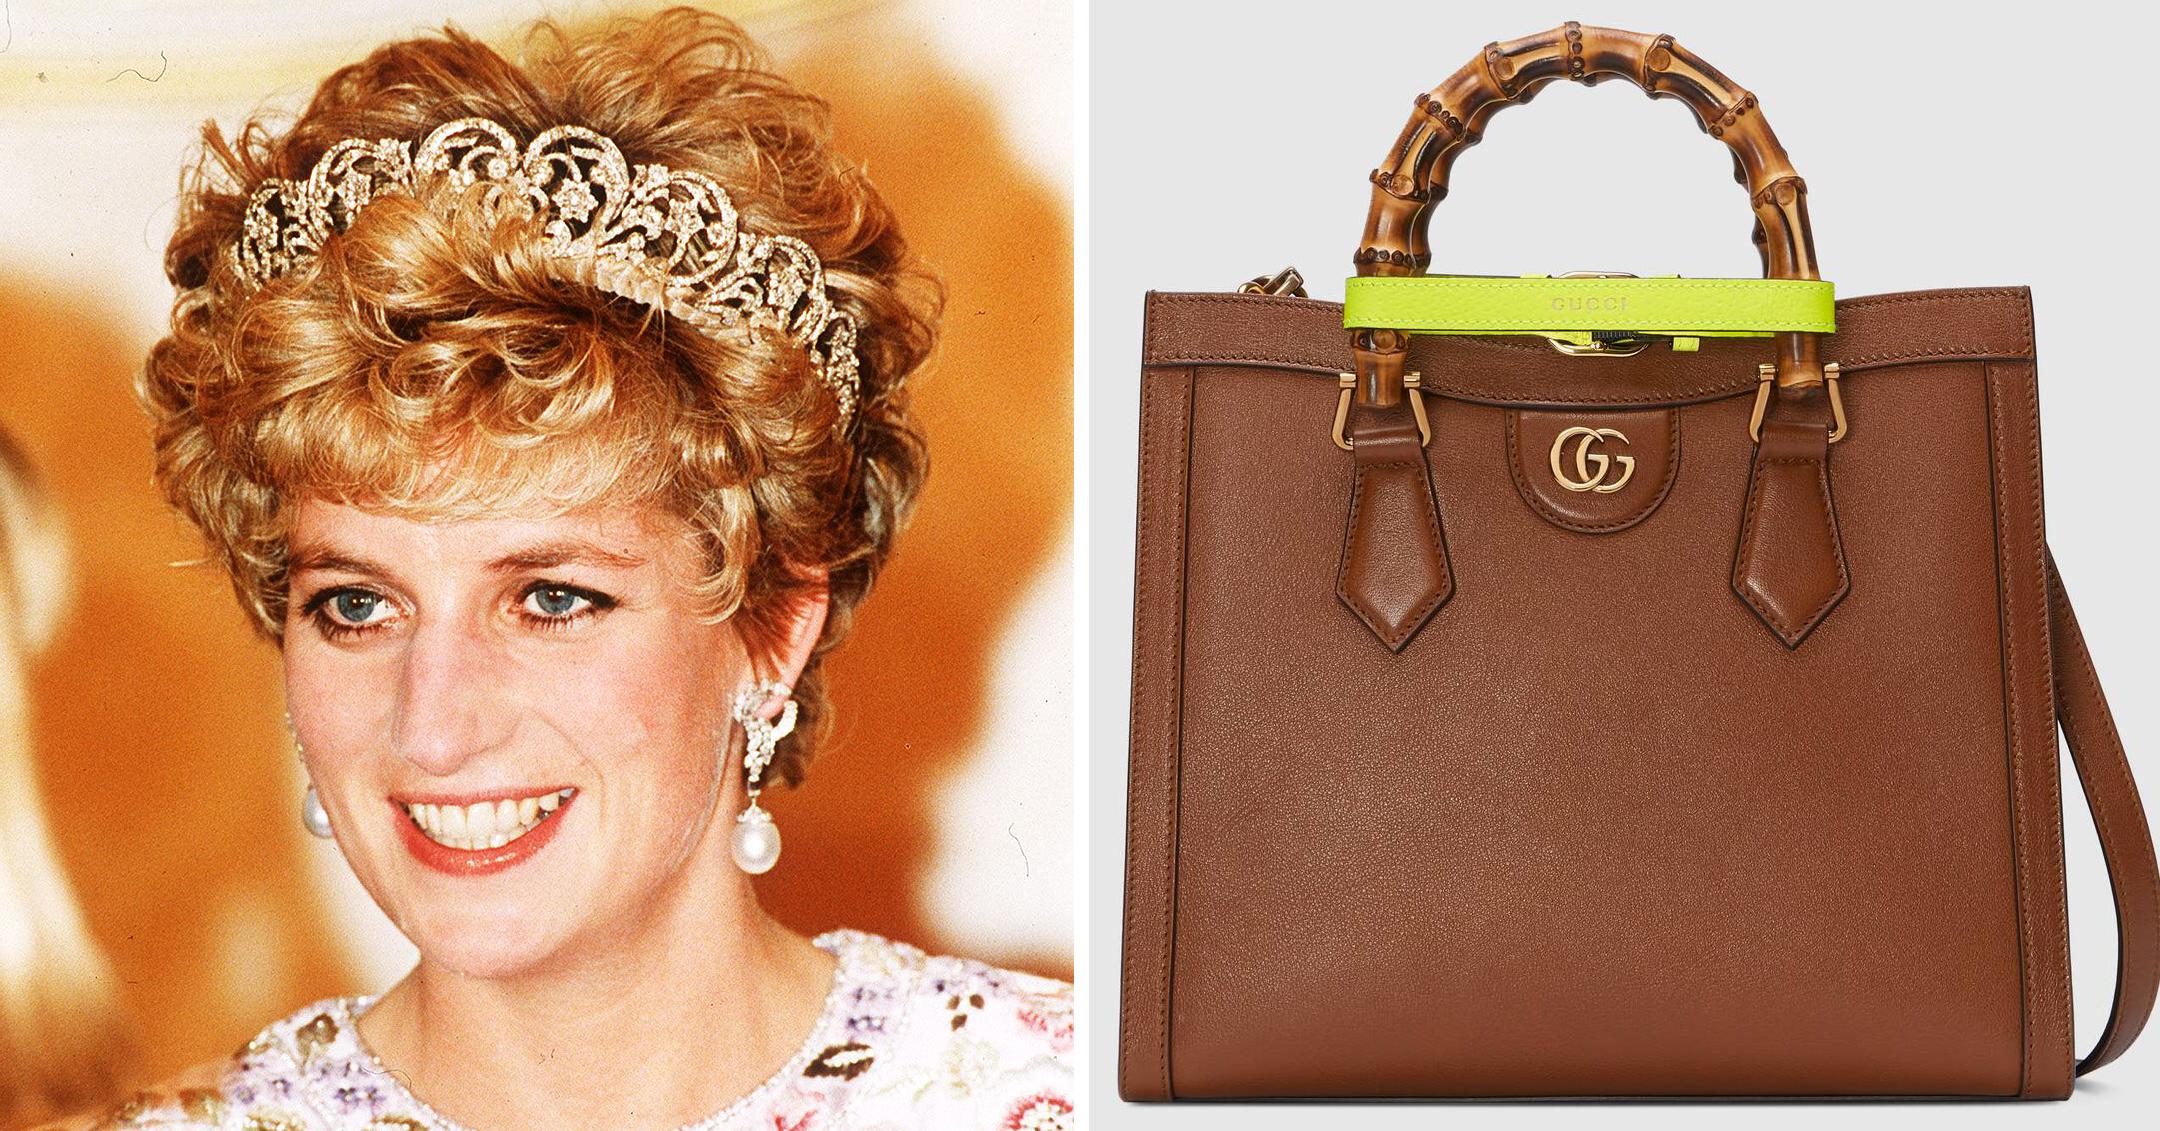 Gucci has reinvented the classic handbag that was Princess Diana's